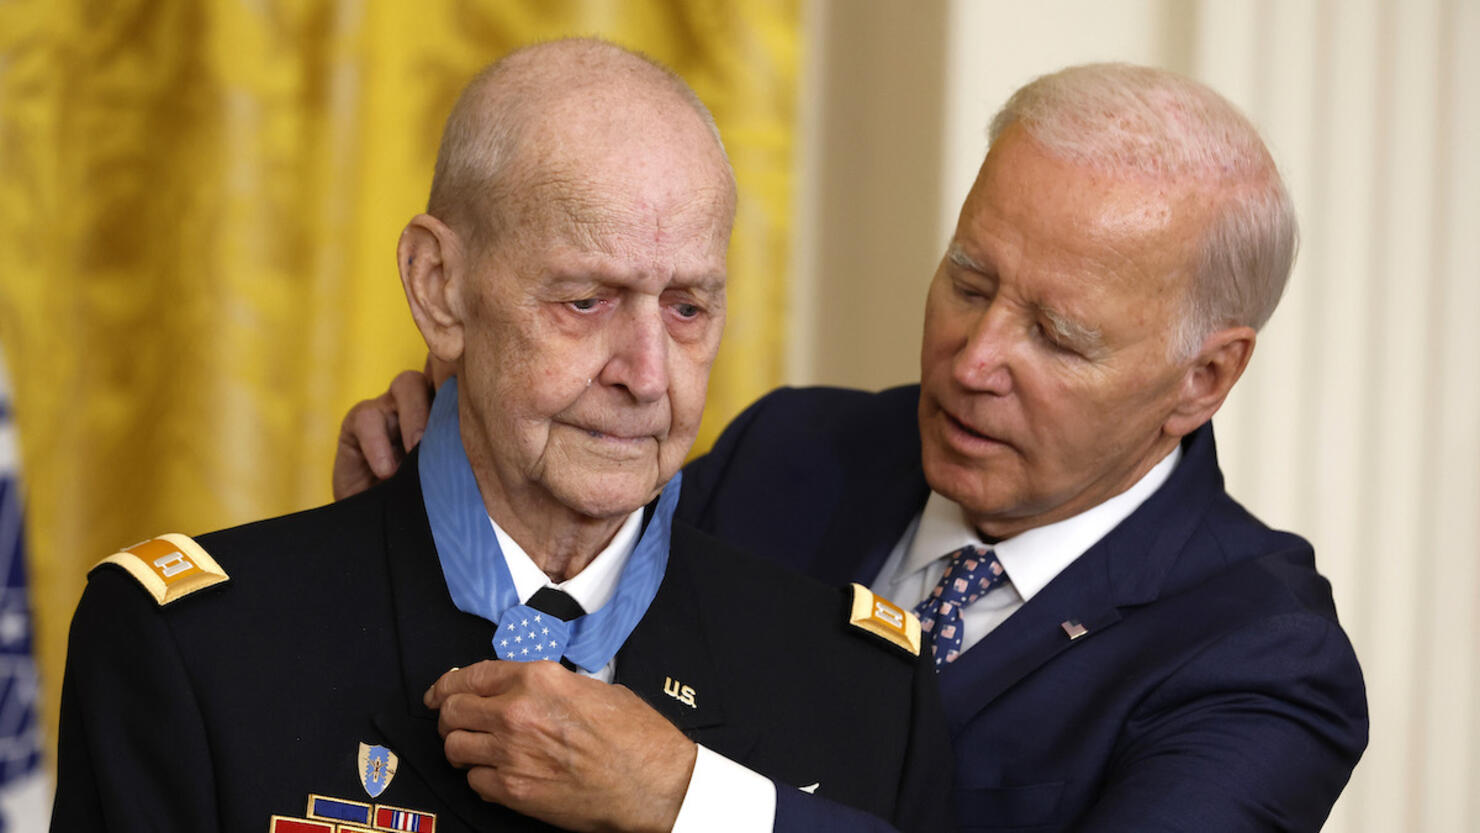 President Biden Awards Medal Of Honor To Vietnam Veteran For Conspicuous Gallantry